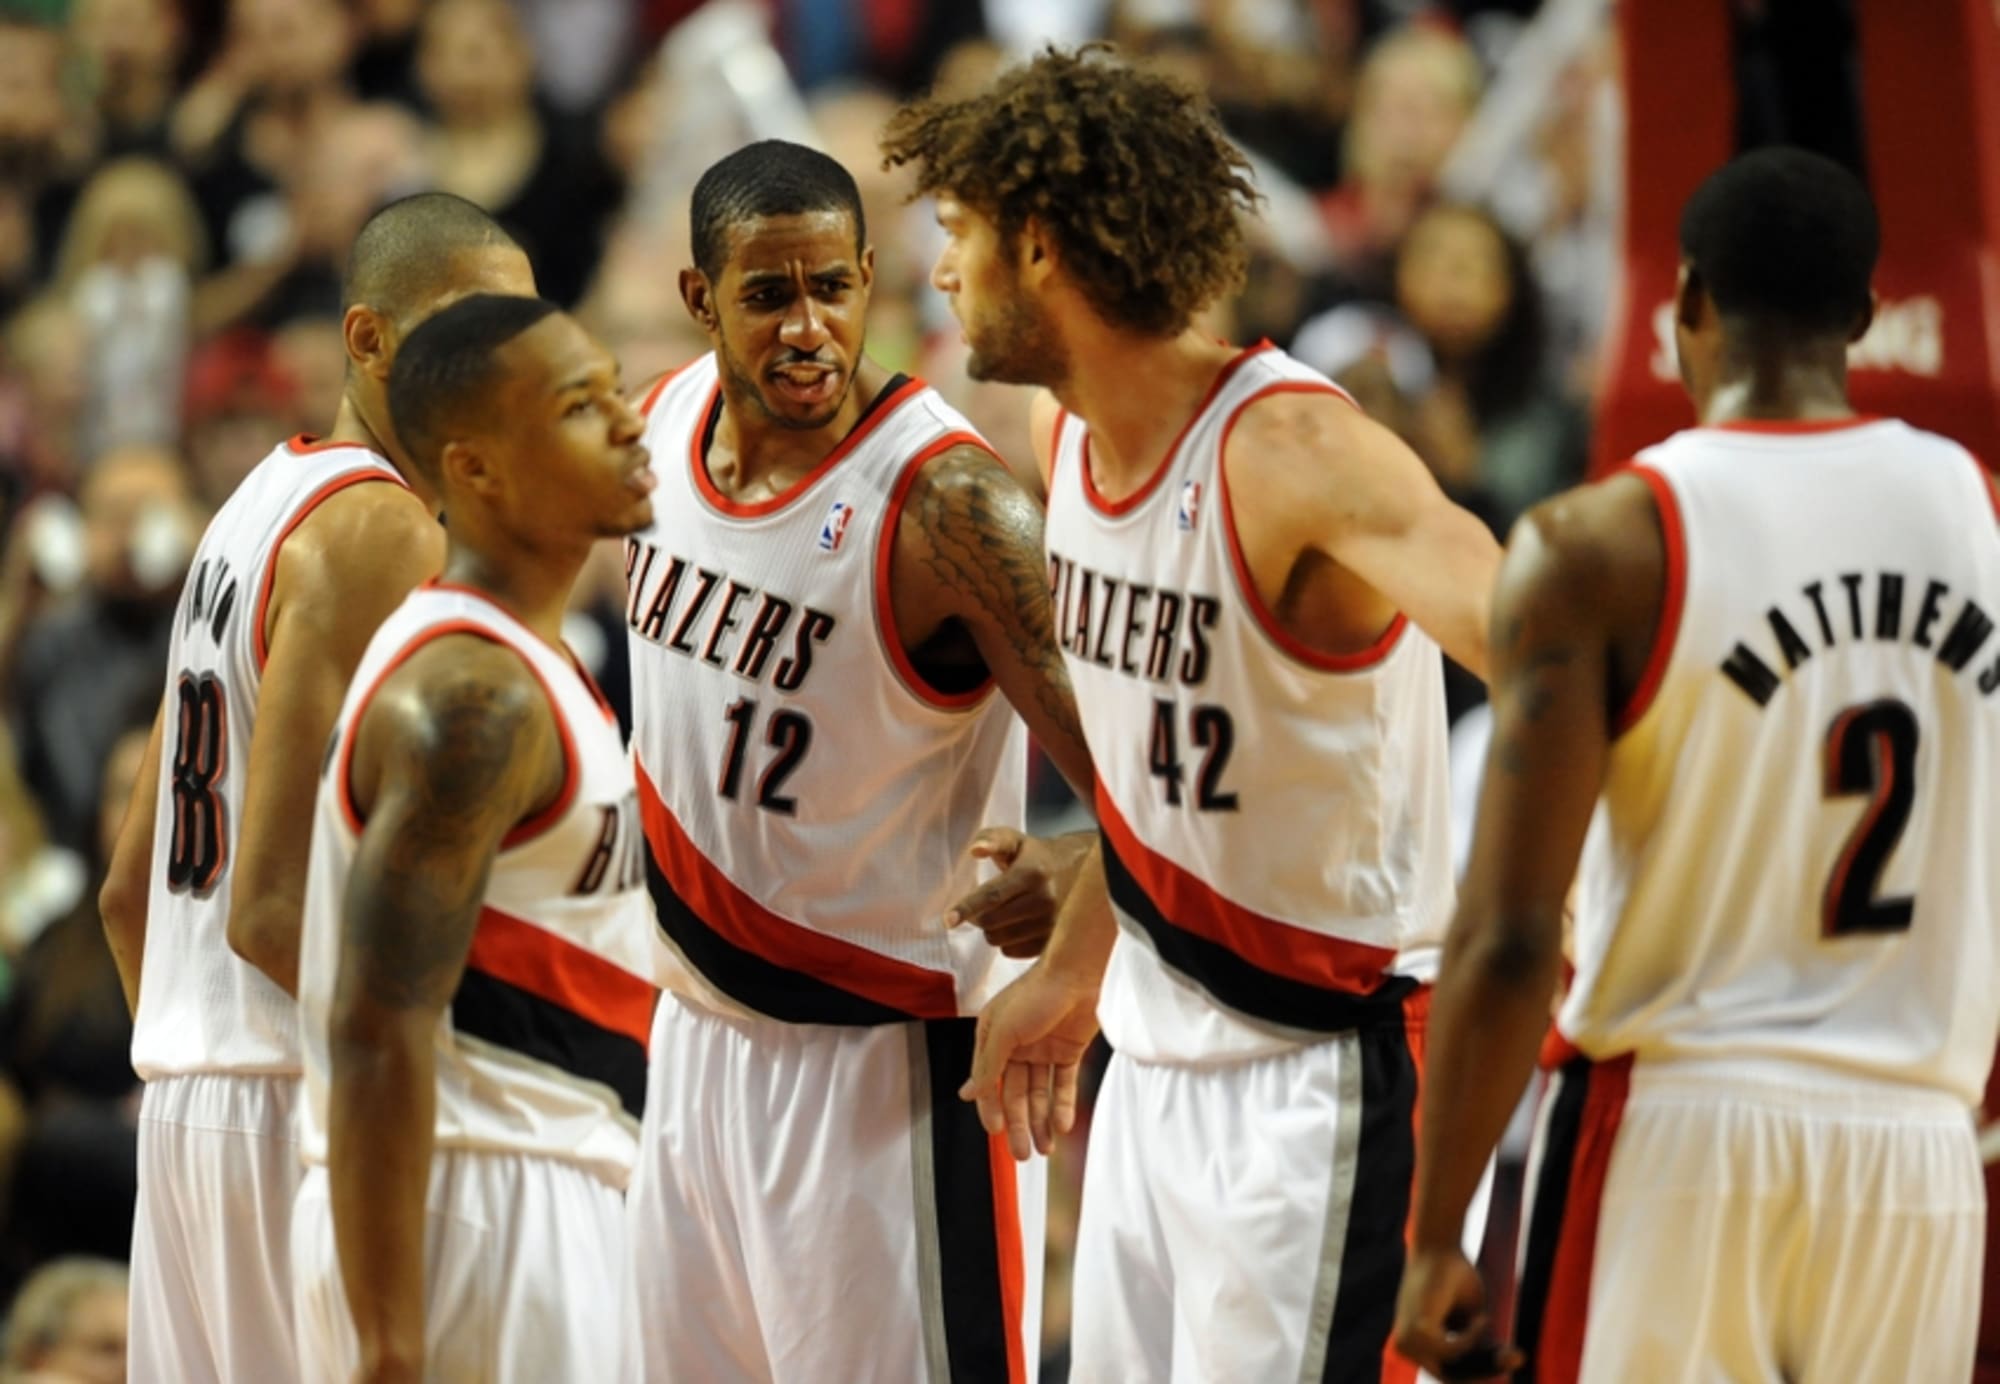 Love outplays Aldridge to lead Wolves past Blazers - The Columbian